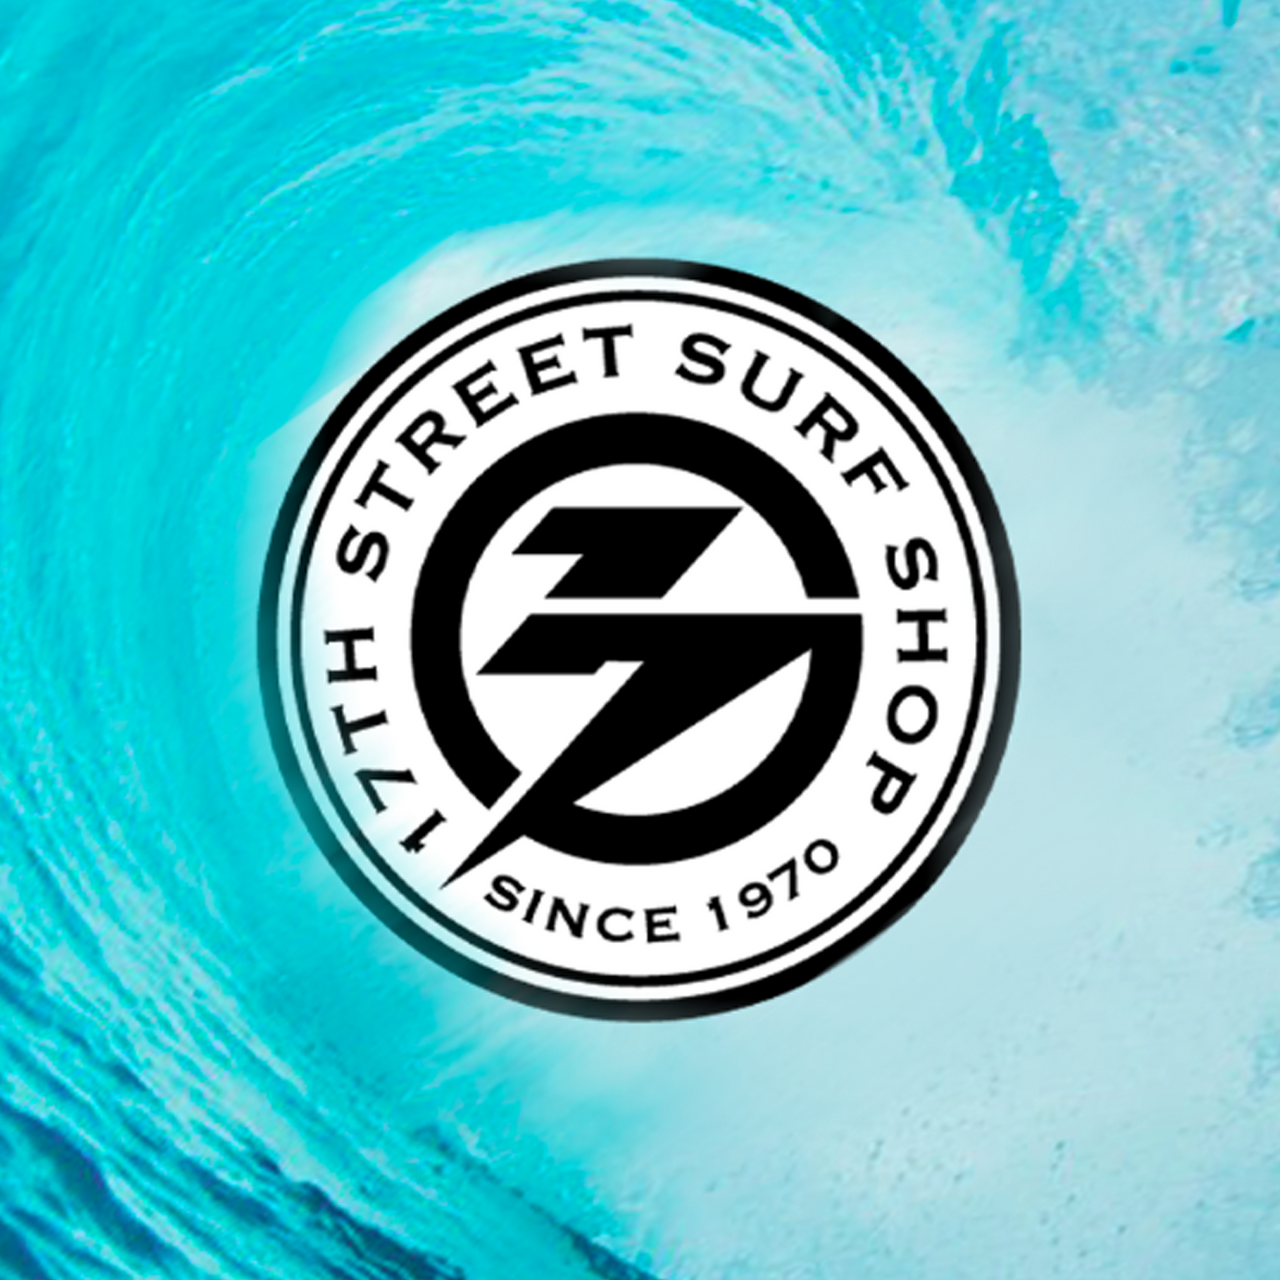 SURF ACCESSORIES ONLINE AND INSTORE AT KEEP IT SIMPLE SURF, CAPE